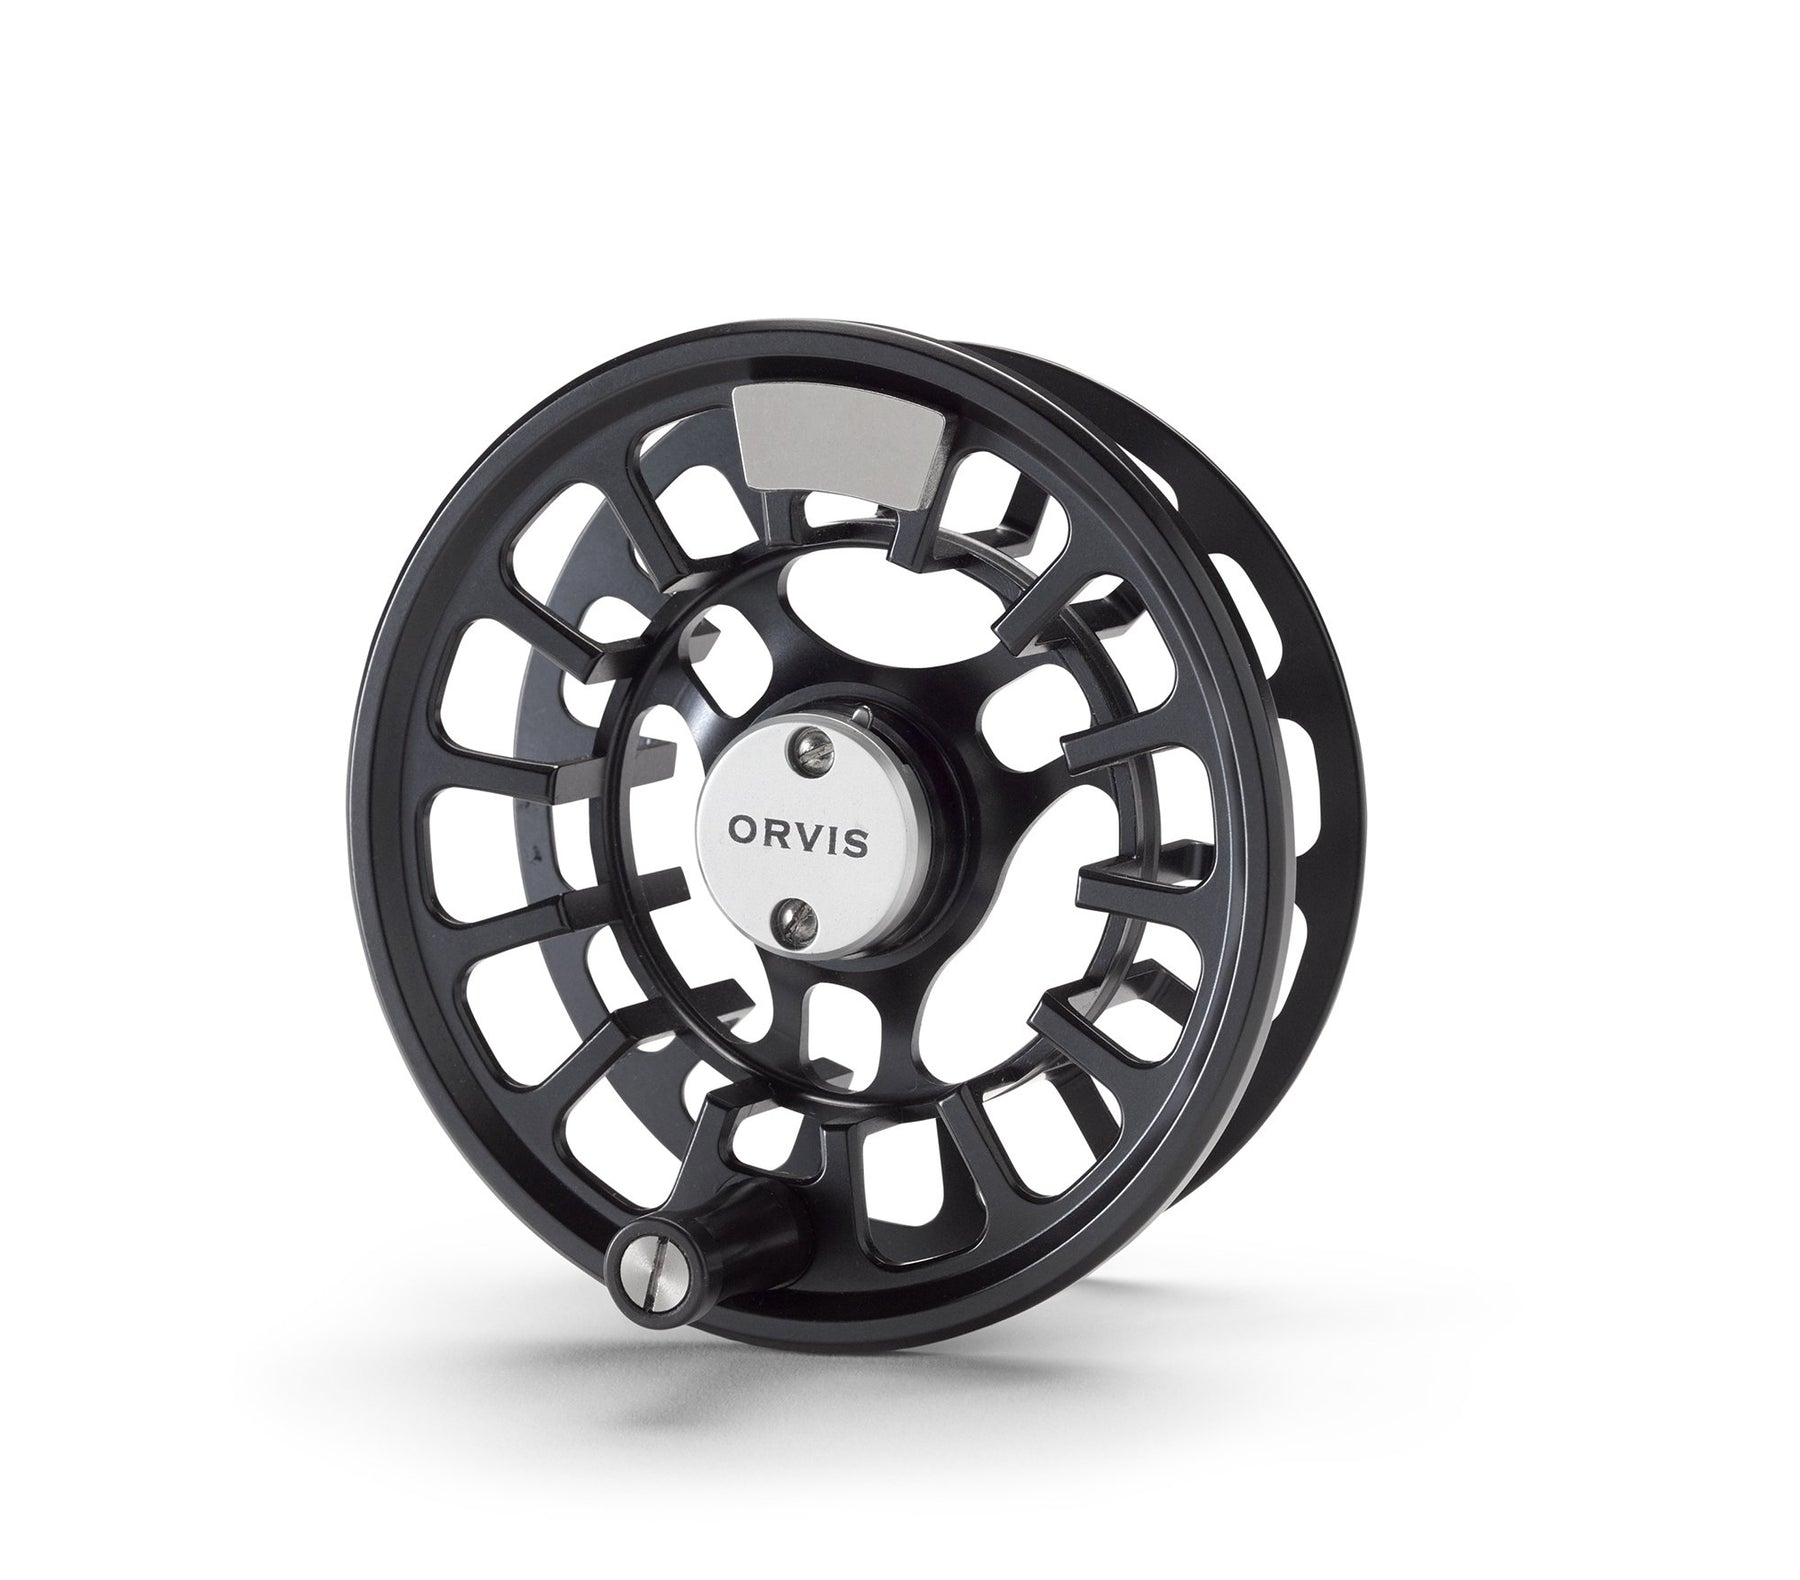 Orvis Mirage LT IV 7/9wt Blackout Fly Reel, Made in the U.S.A. - FREE  SHIPPING